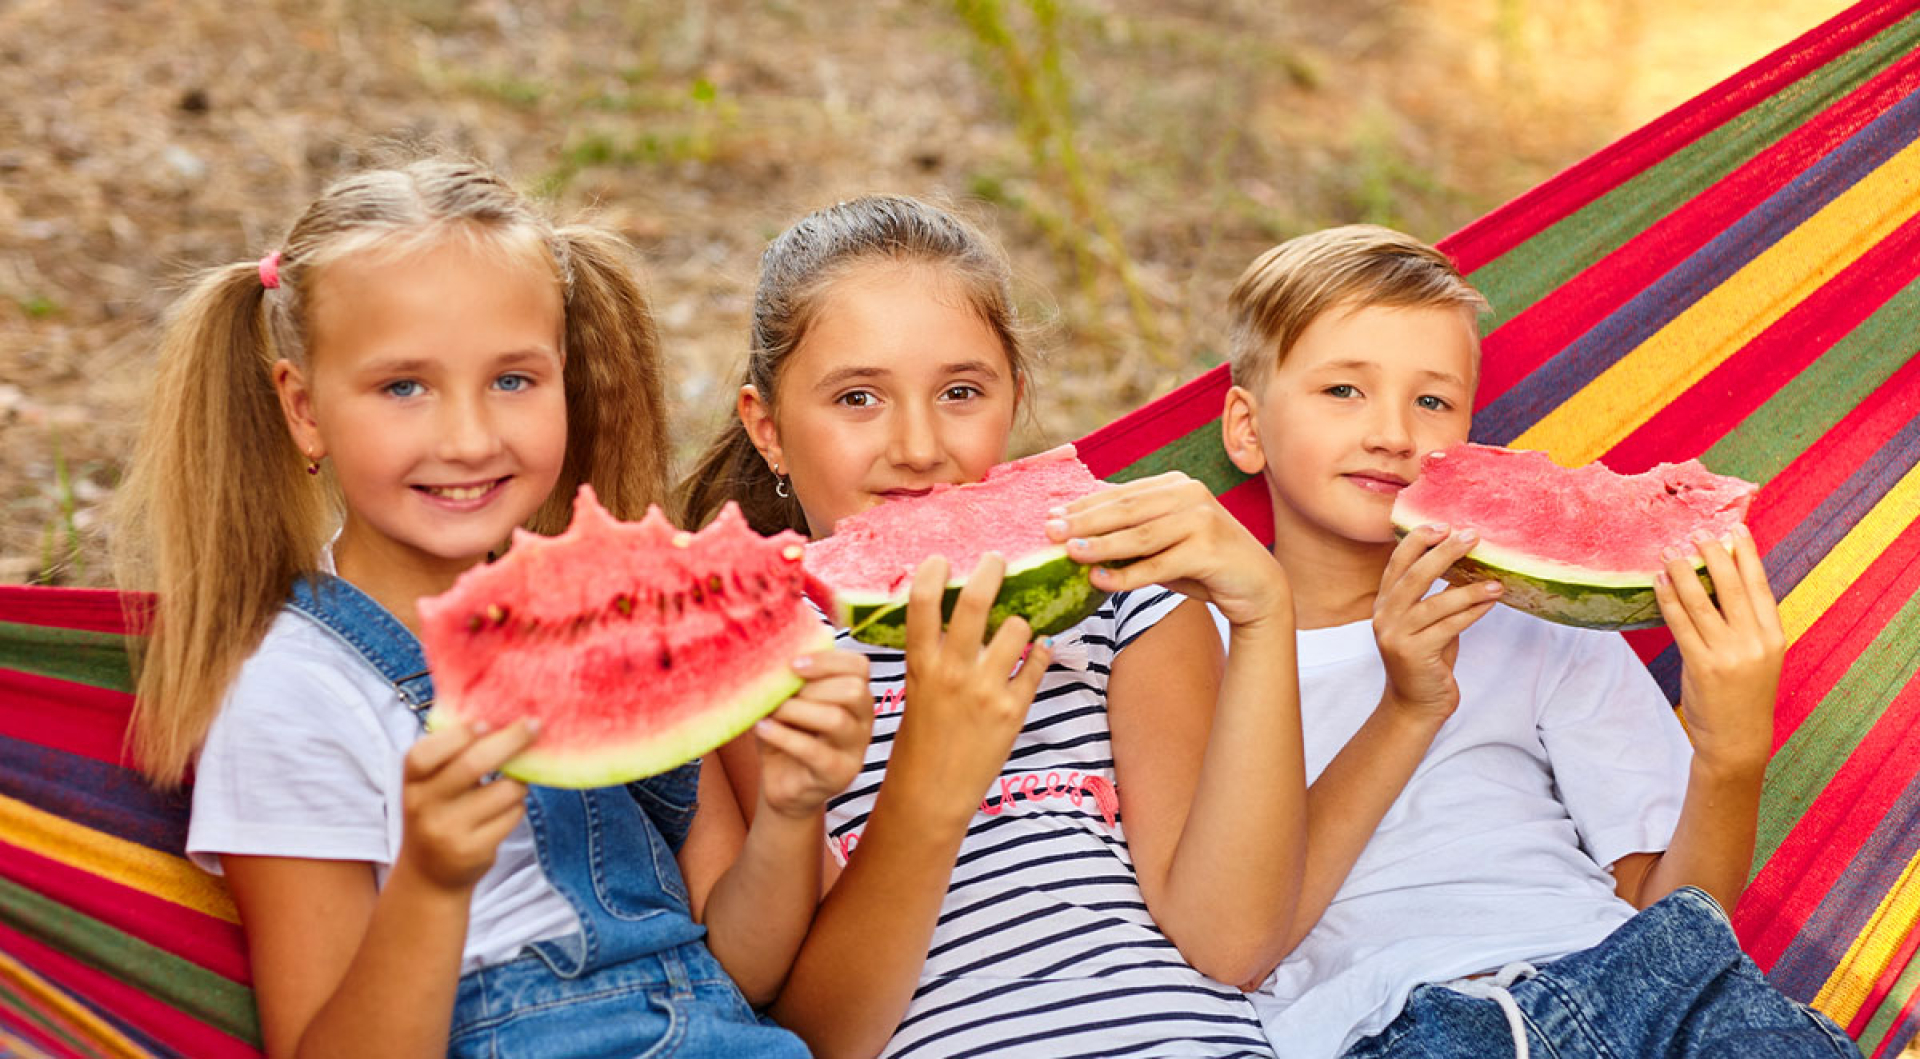 How to Ensure Your Kids Have a Great Summer